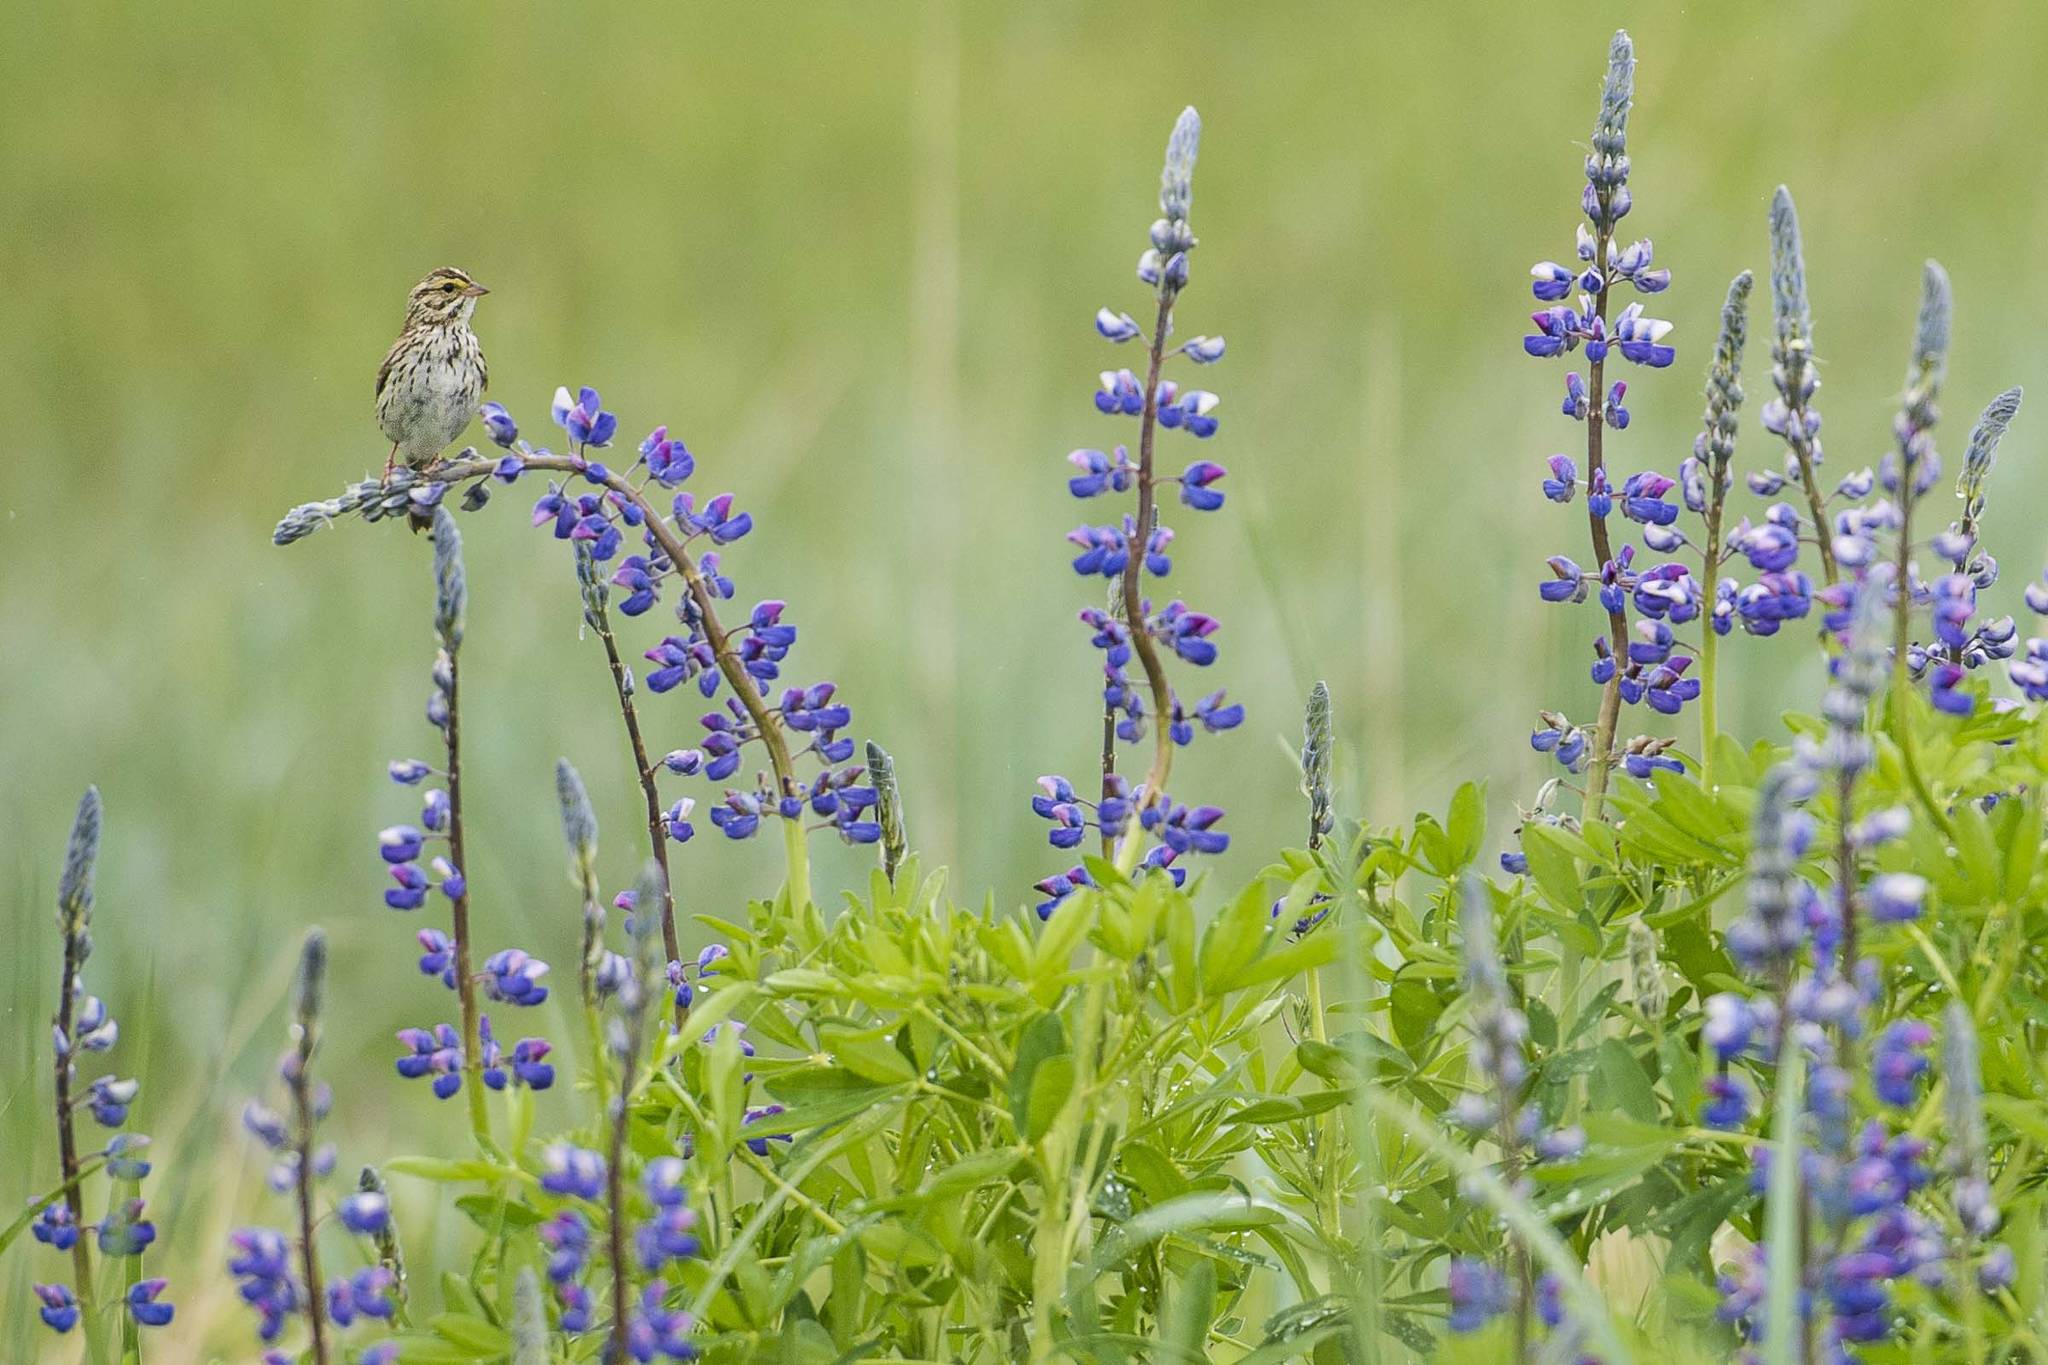 A Savannah sparrow uses lupine blossoms as a perch in the Mendenhall Wetlands State Game Refuge on Monday, June 3, 2019. (Michael Penn | Juneau Empire)